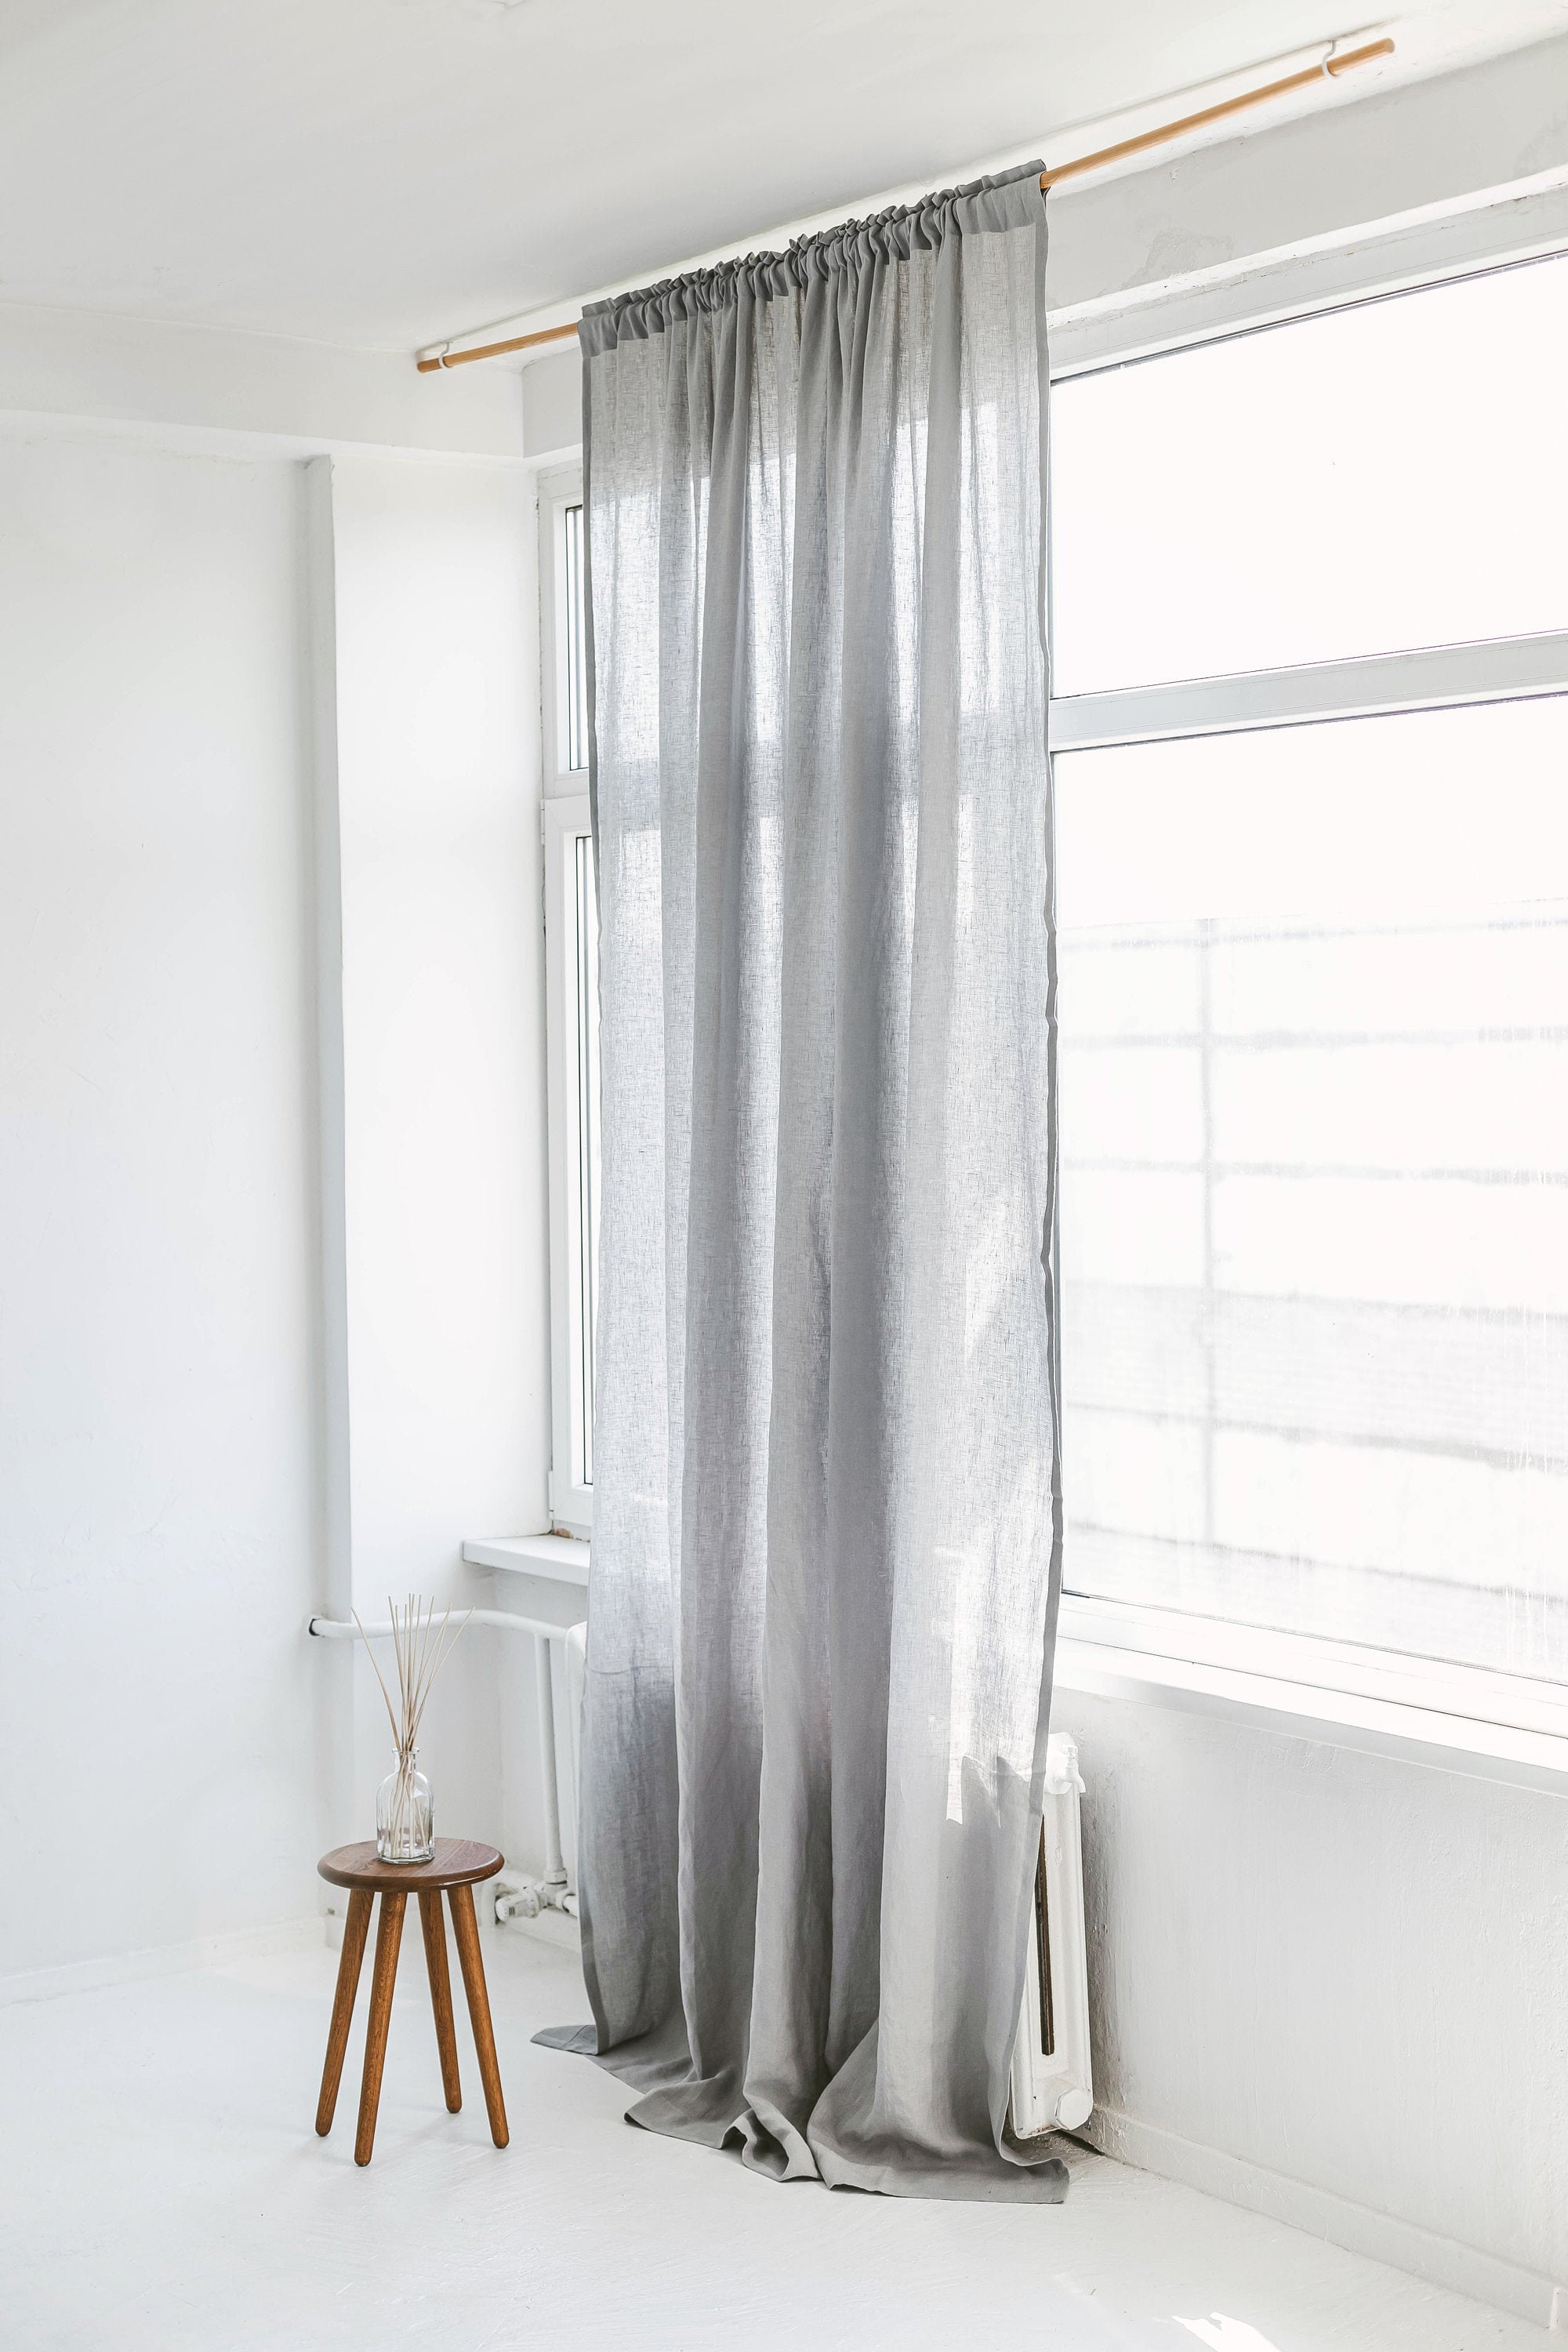 86.6/220 Cm Width Linen Curtains With Rod Pocket Crown Top